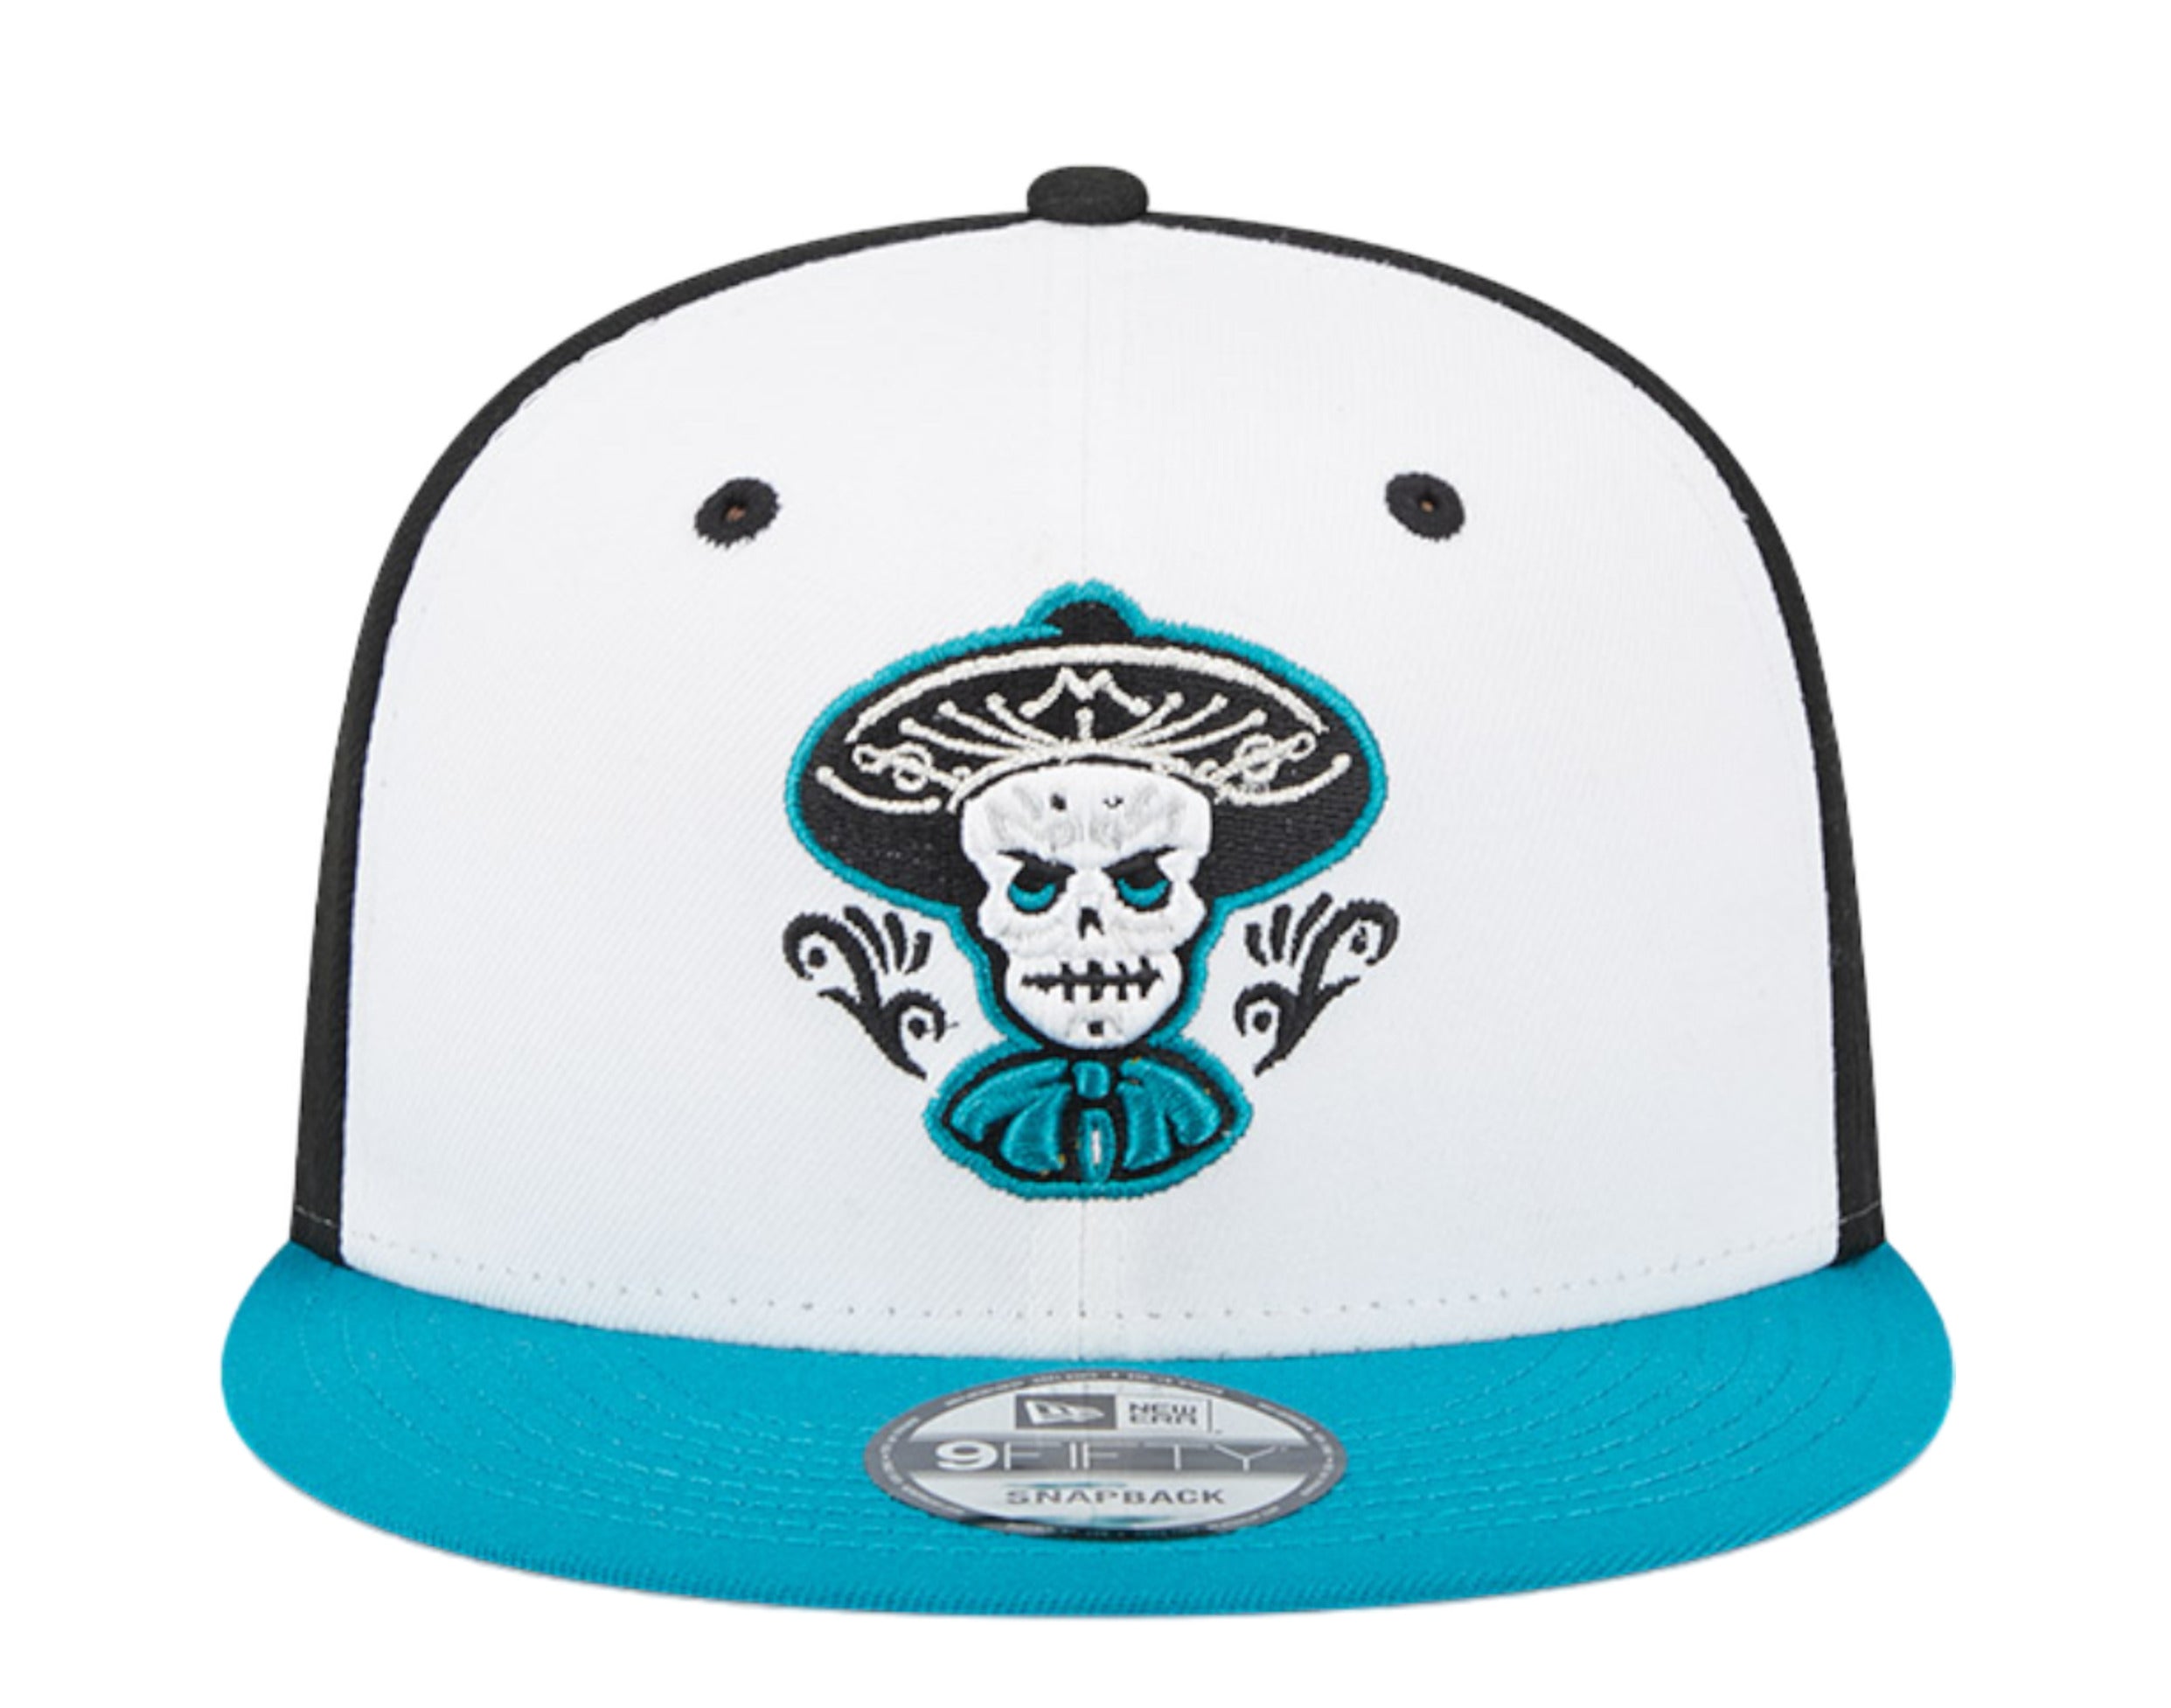 Day of The Dead Pink Sugar Skull 9FIFTY Snapback Hat, Black, by New Era